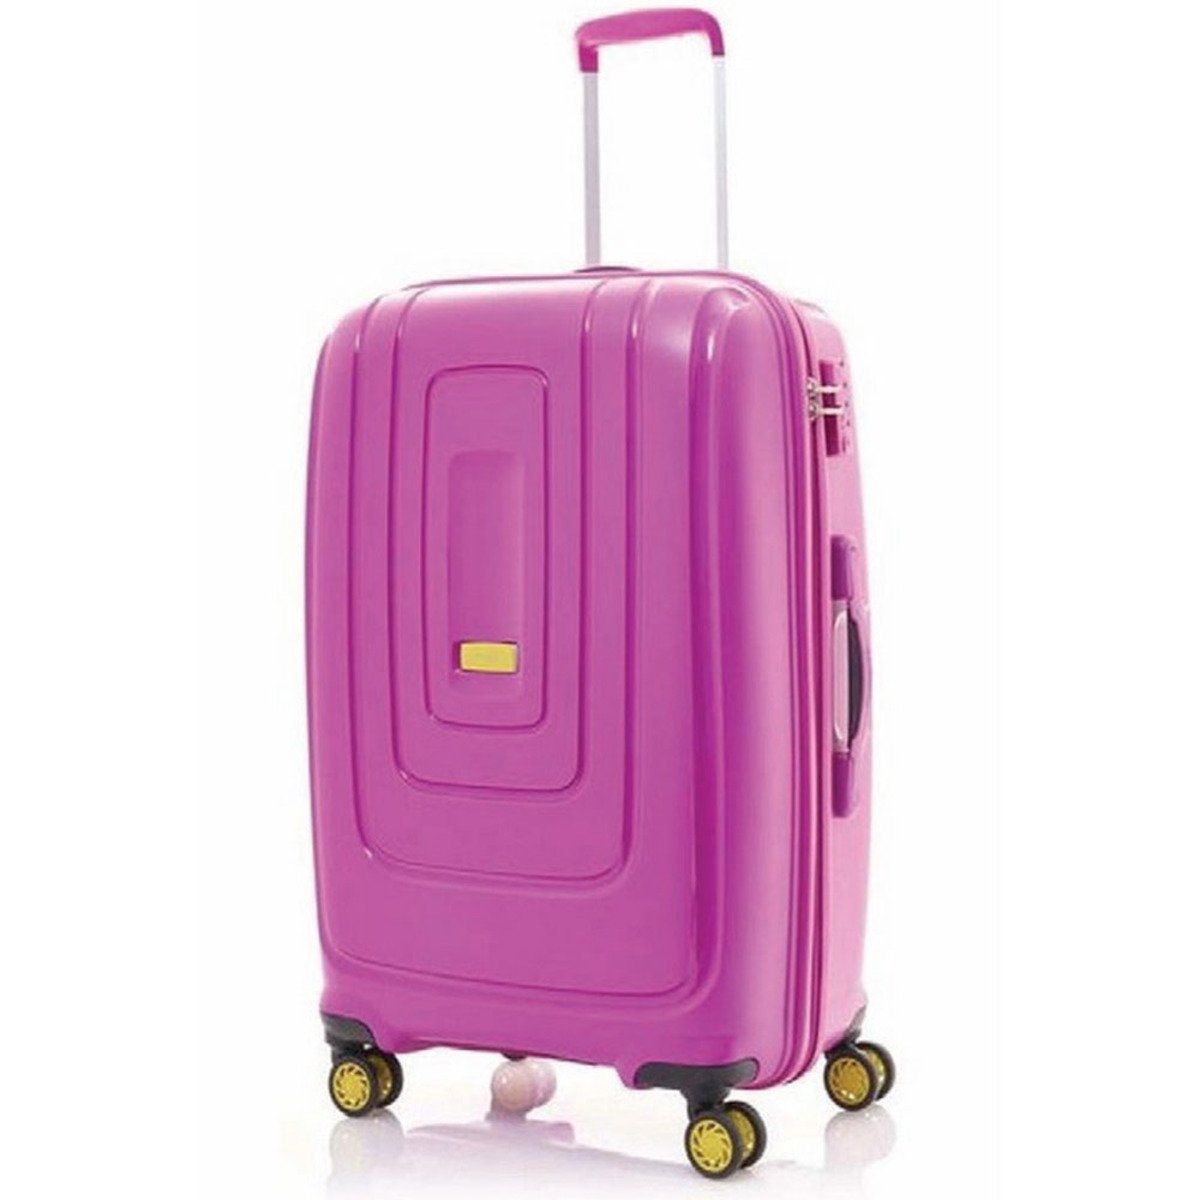 American Tourister Lightrax 4Wheel Hard Trolley 55cm Assorted Colors